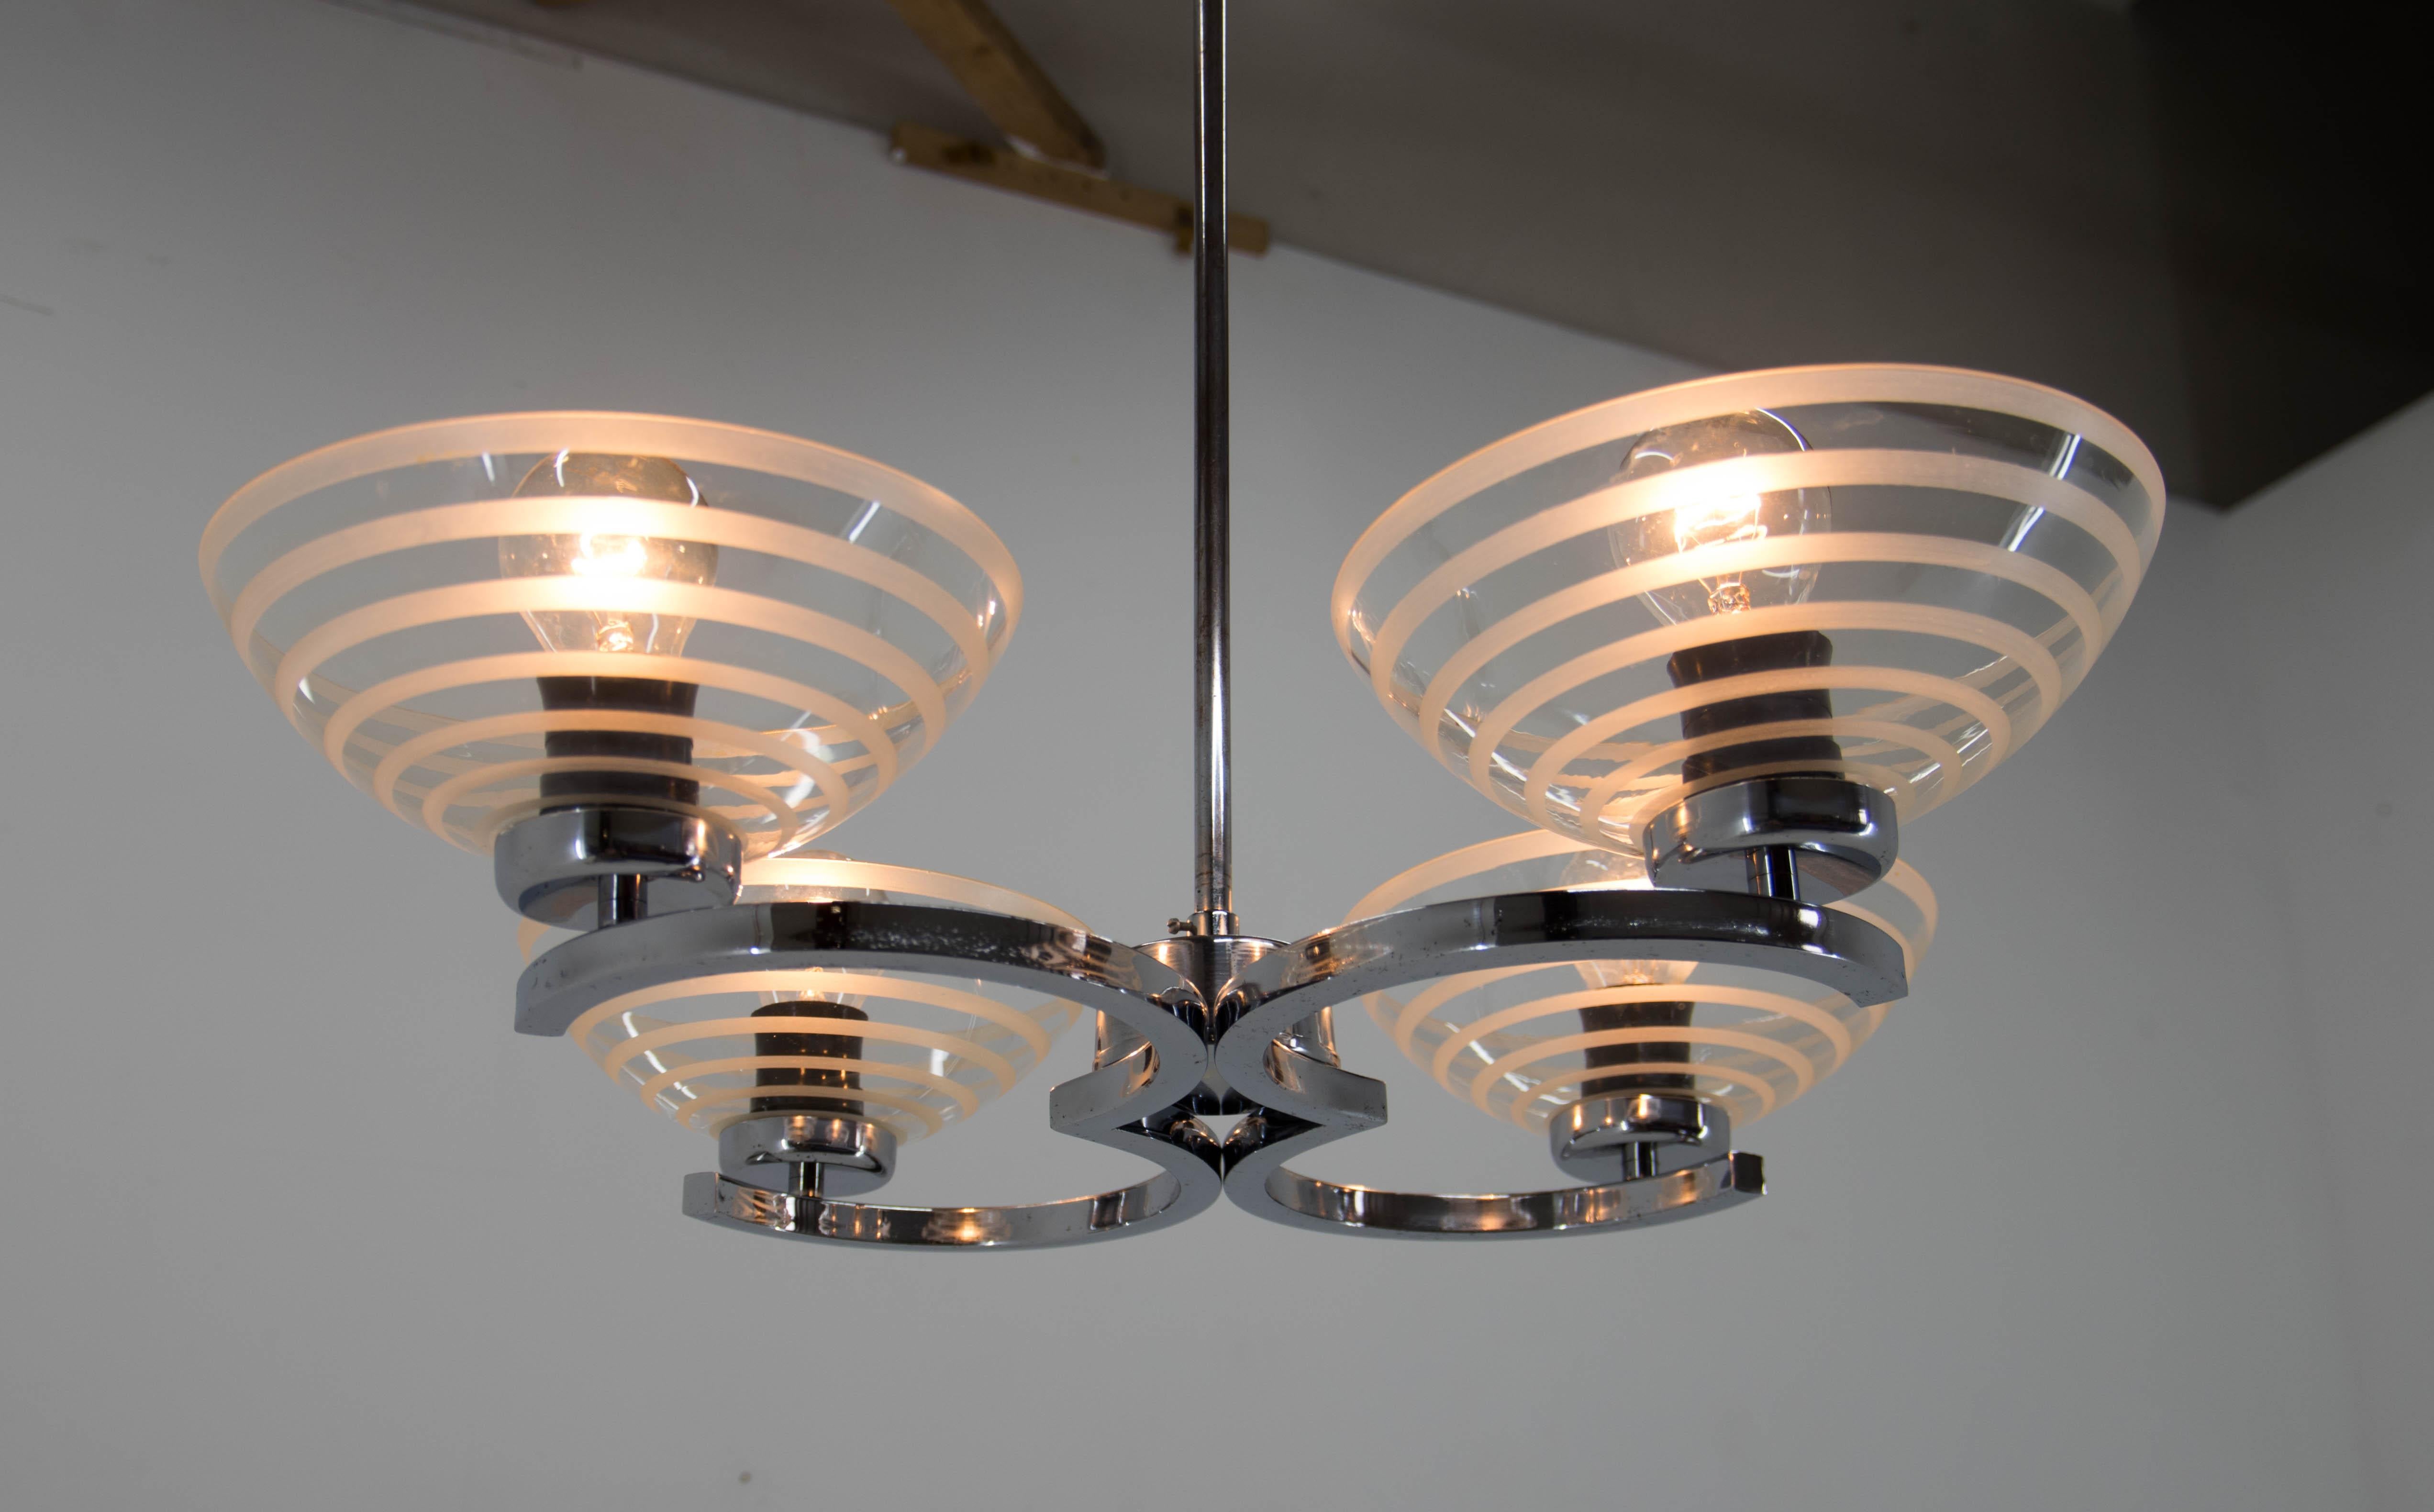 4-flamming Art Deco/Functionalism chandelier made by Napako, labeled.
Restored: Chrome polished, rewired: 4x60W, E25-E27 bulbs
US wiring compatible.